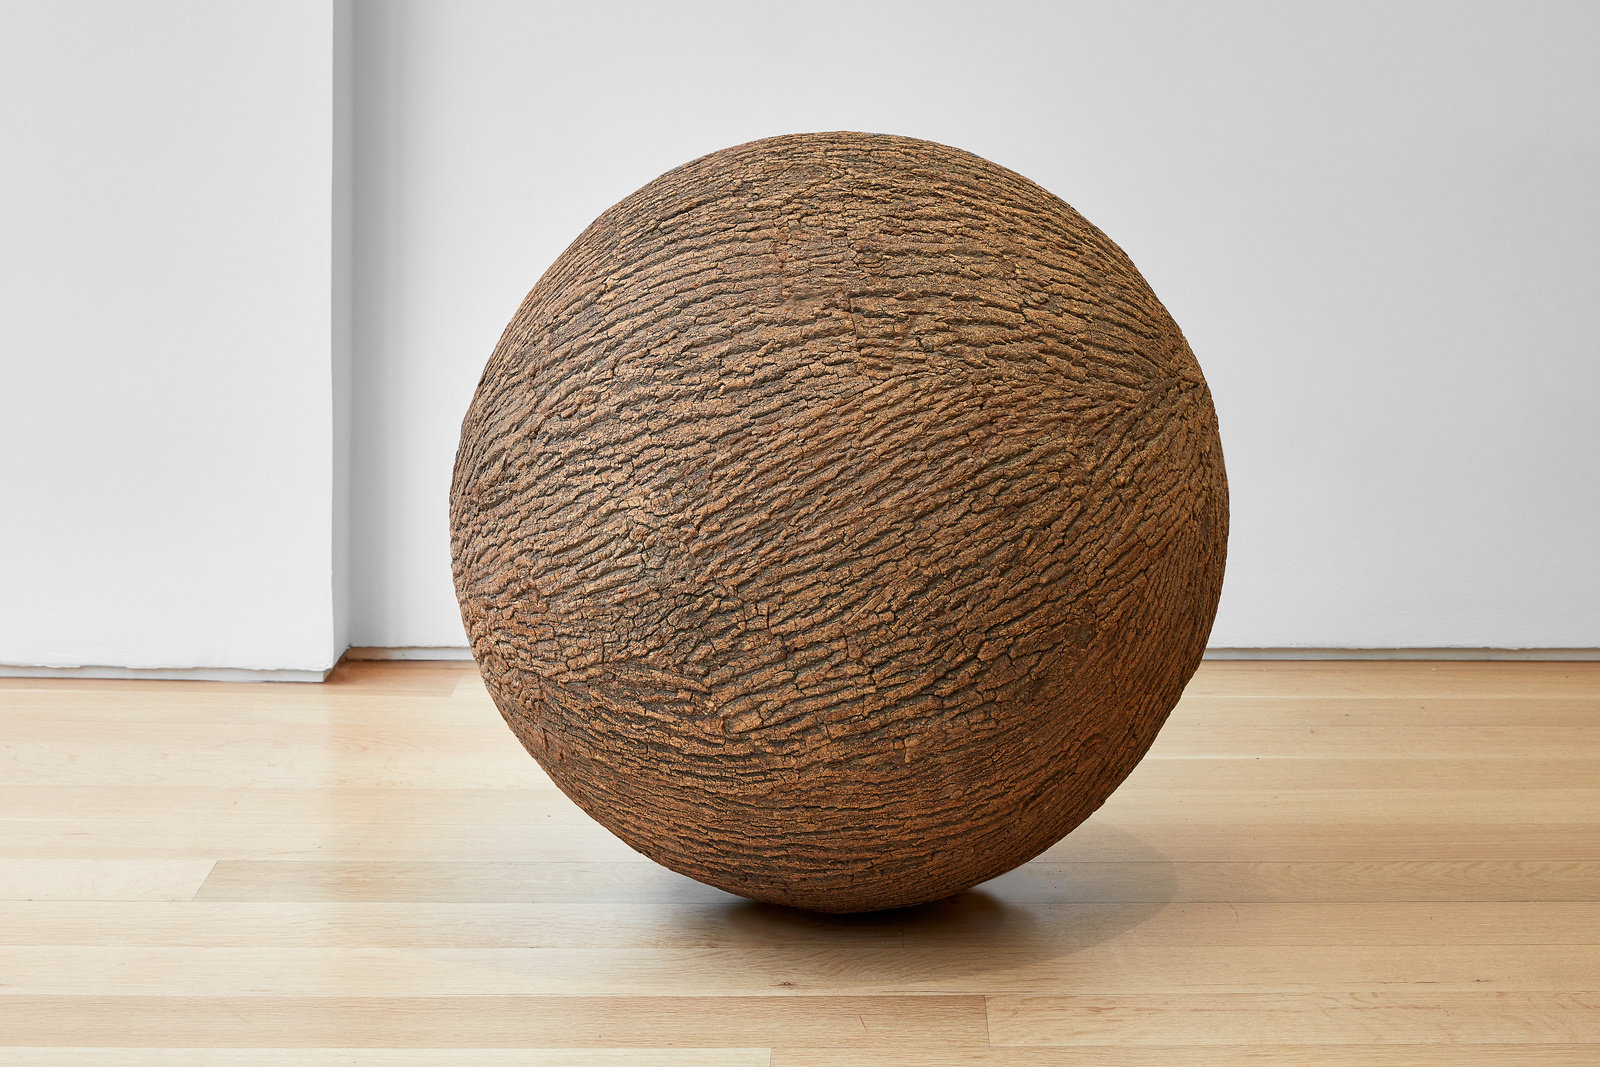 A spherical sculpture made of wood and bark that resembles a tree trunk by Lars Fisk. 